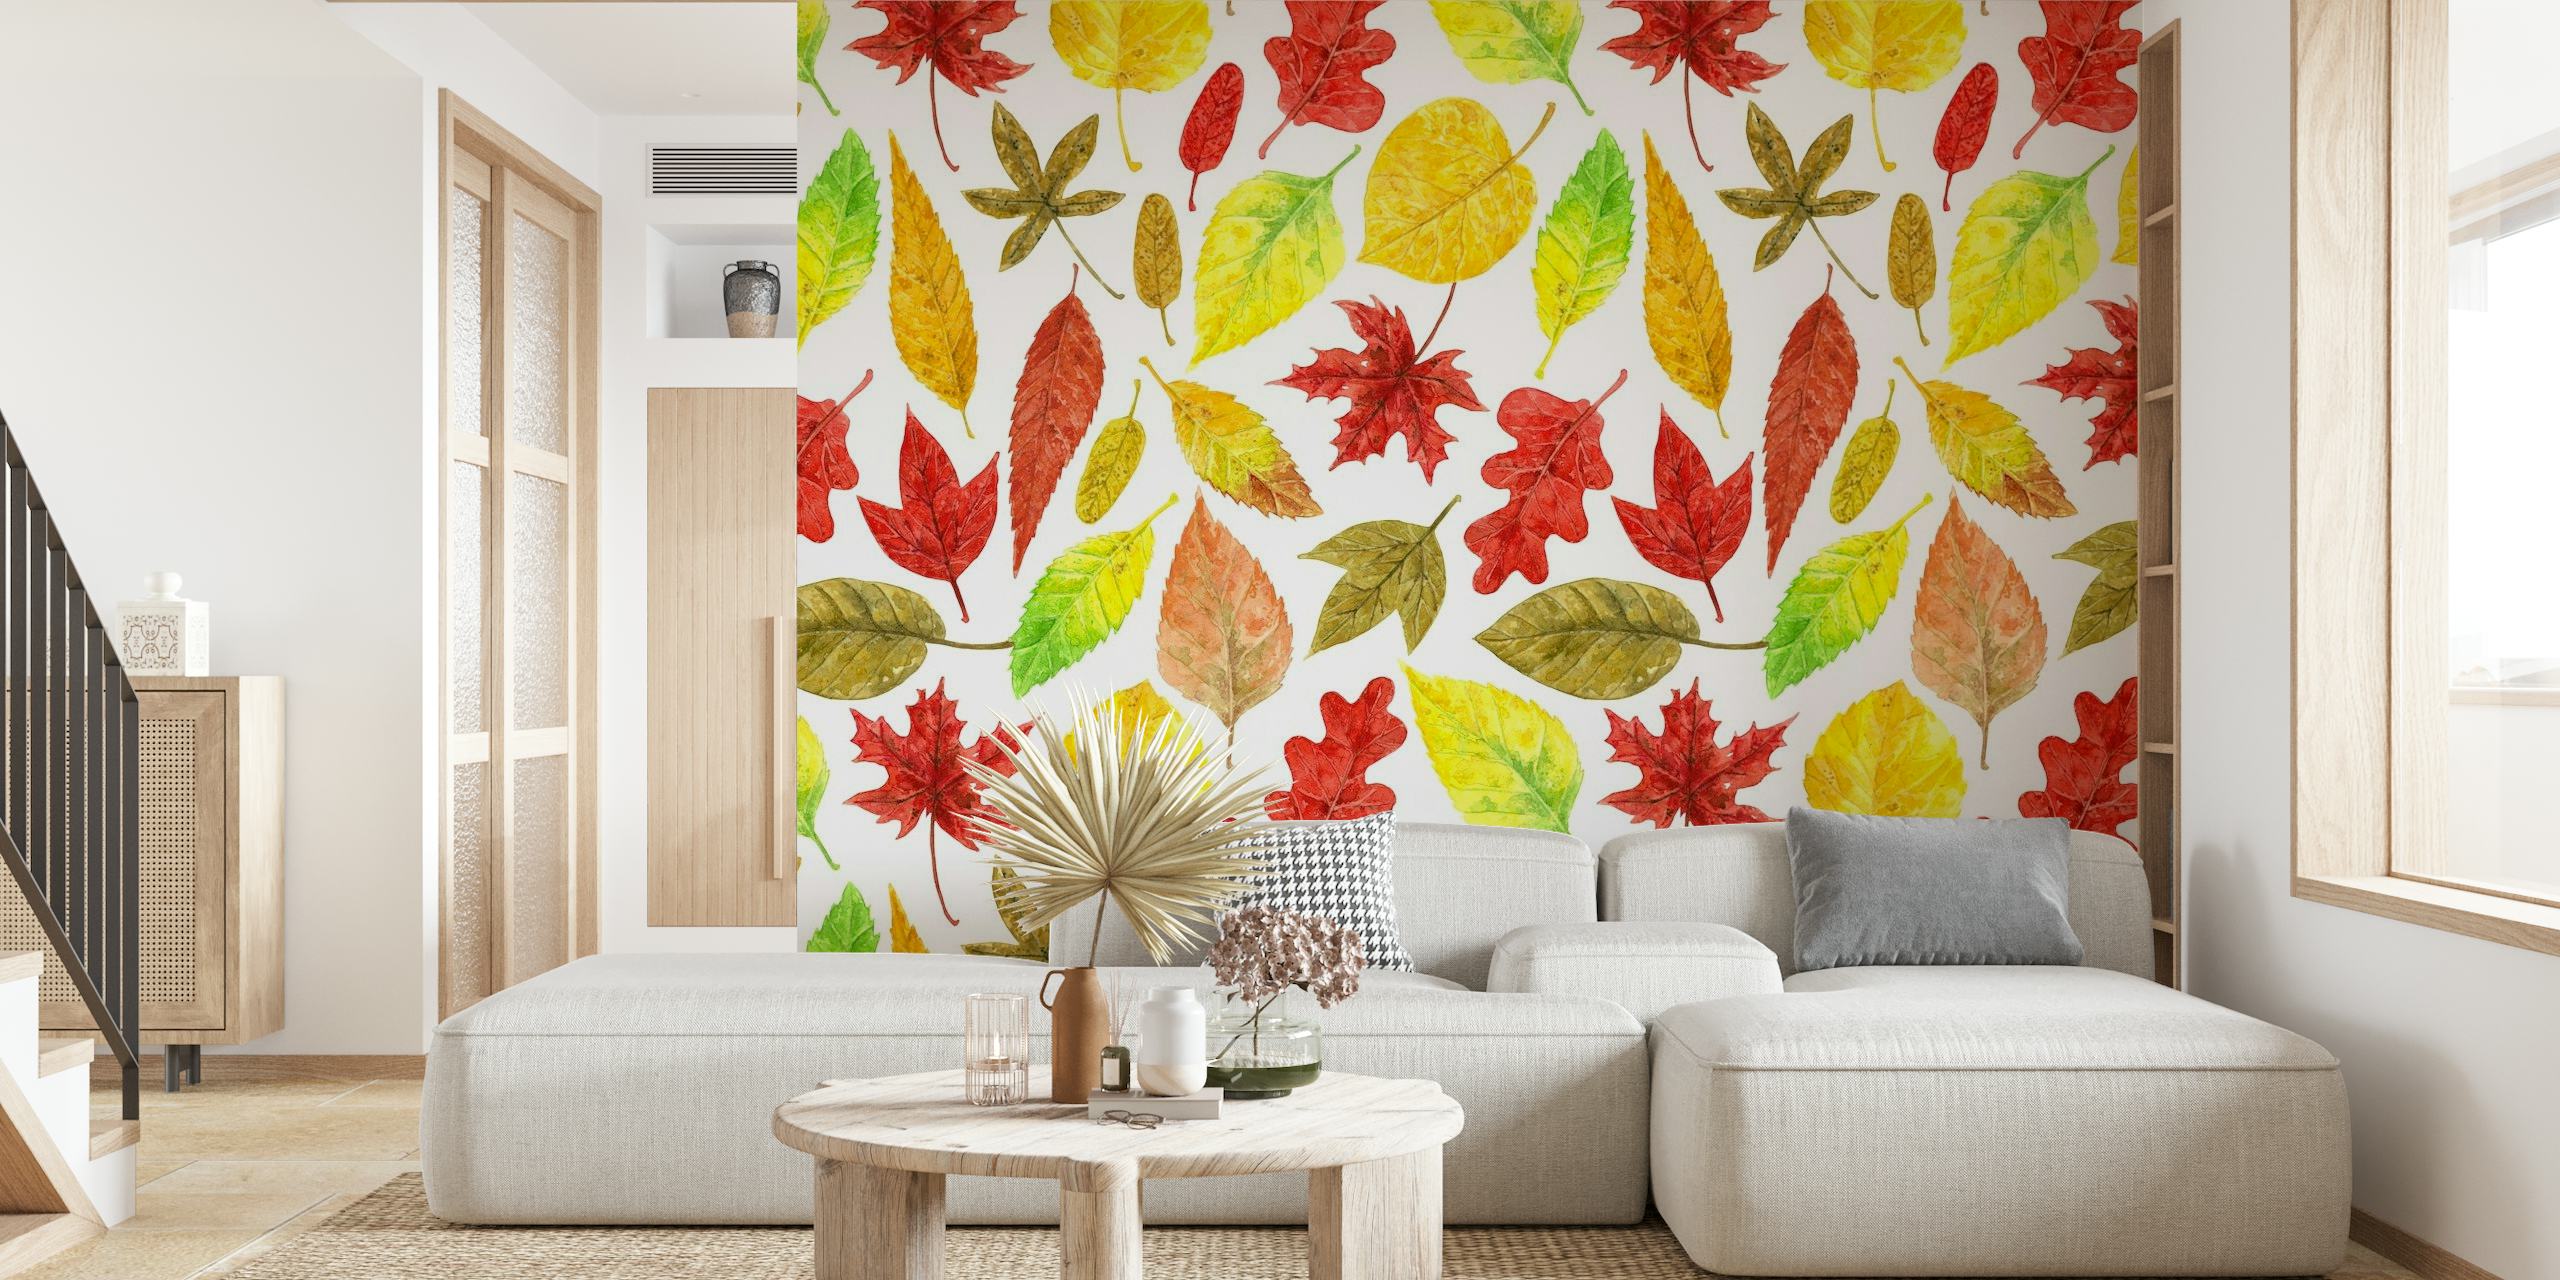 Watercolor autumn leaves in red, orange, and yellow hues on a white background mural